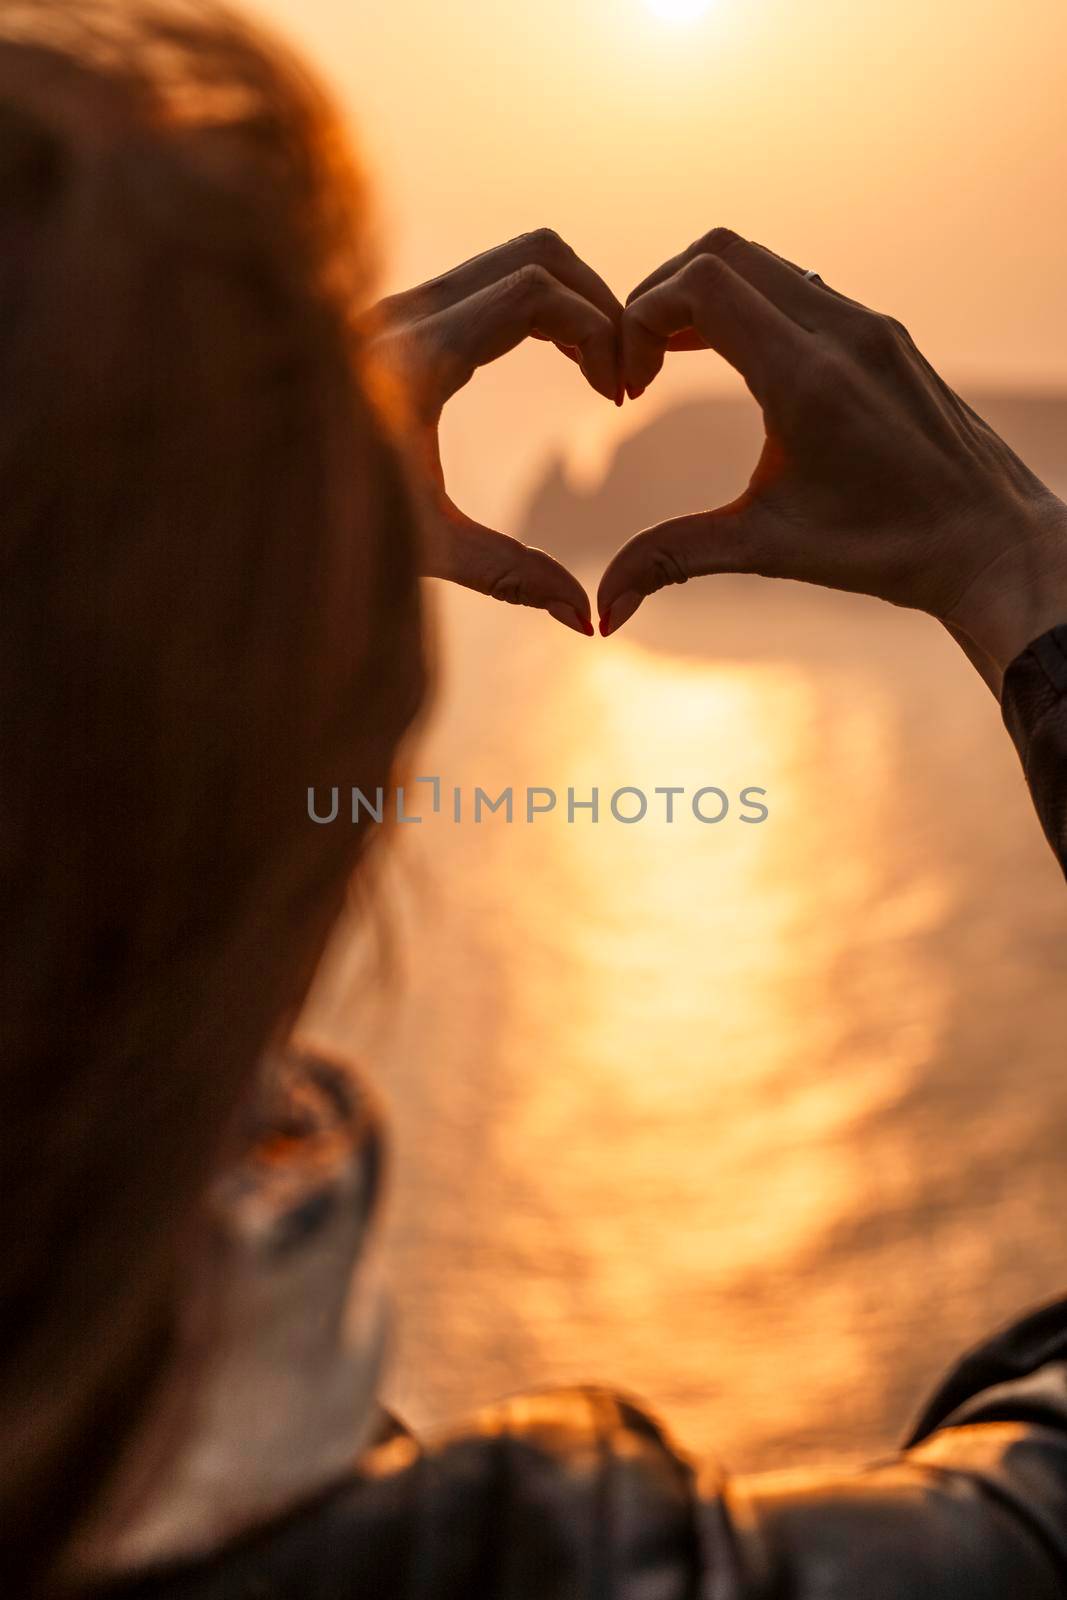 Women's hands symbol of the heart lifestyle and feelings concept with sunset light nature on a winter background. Valentine's day.